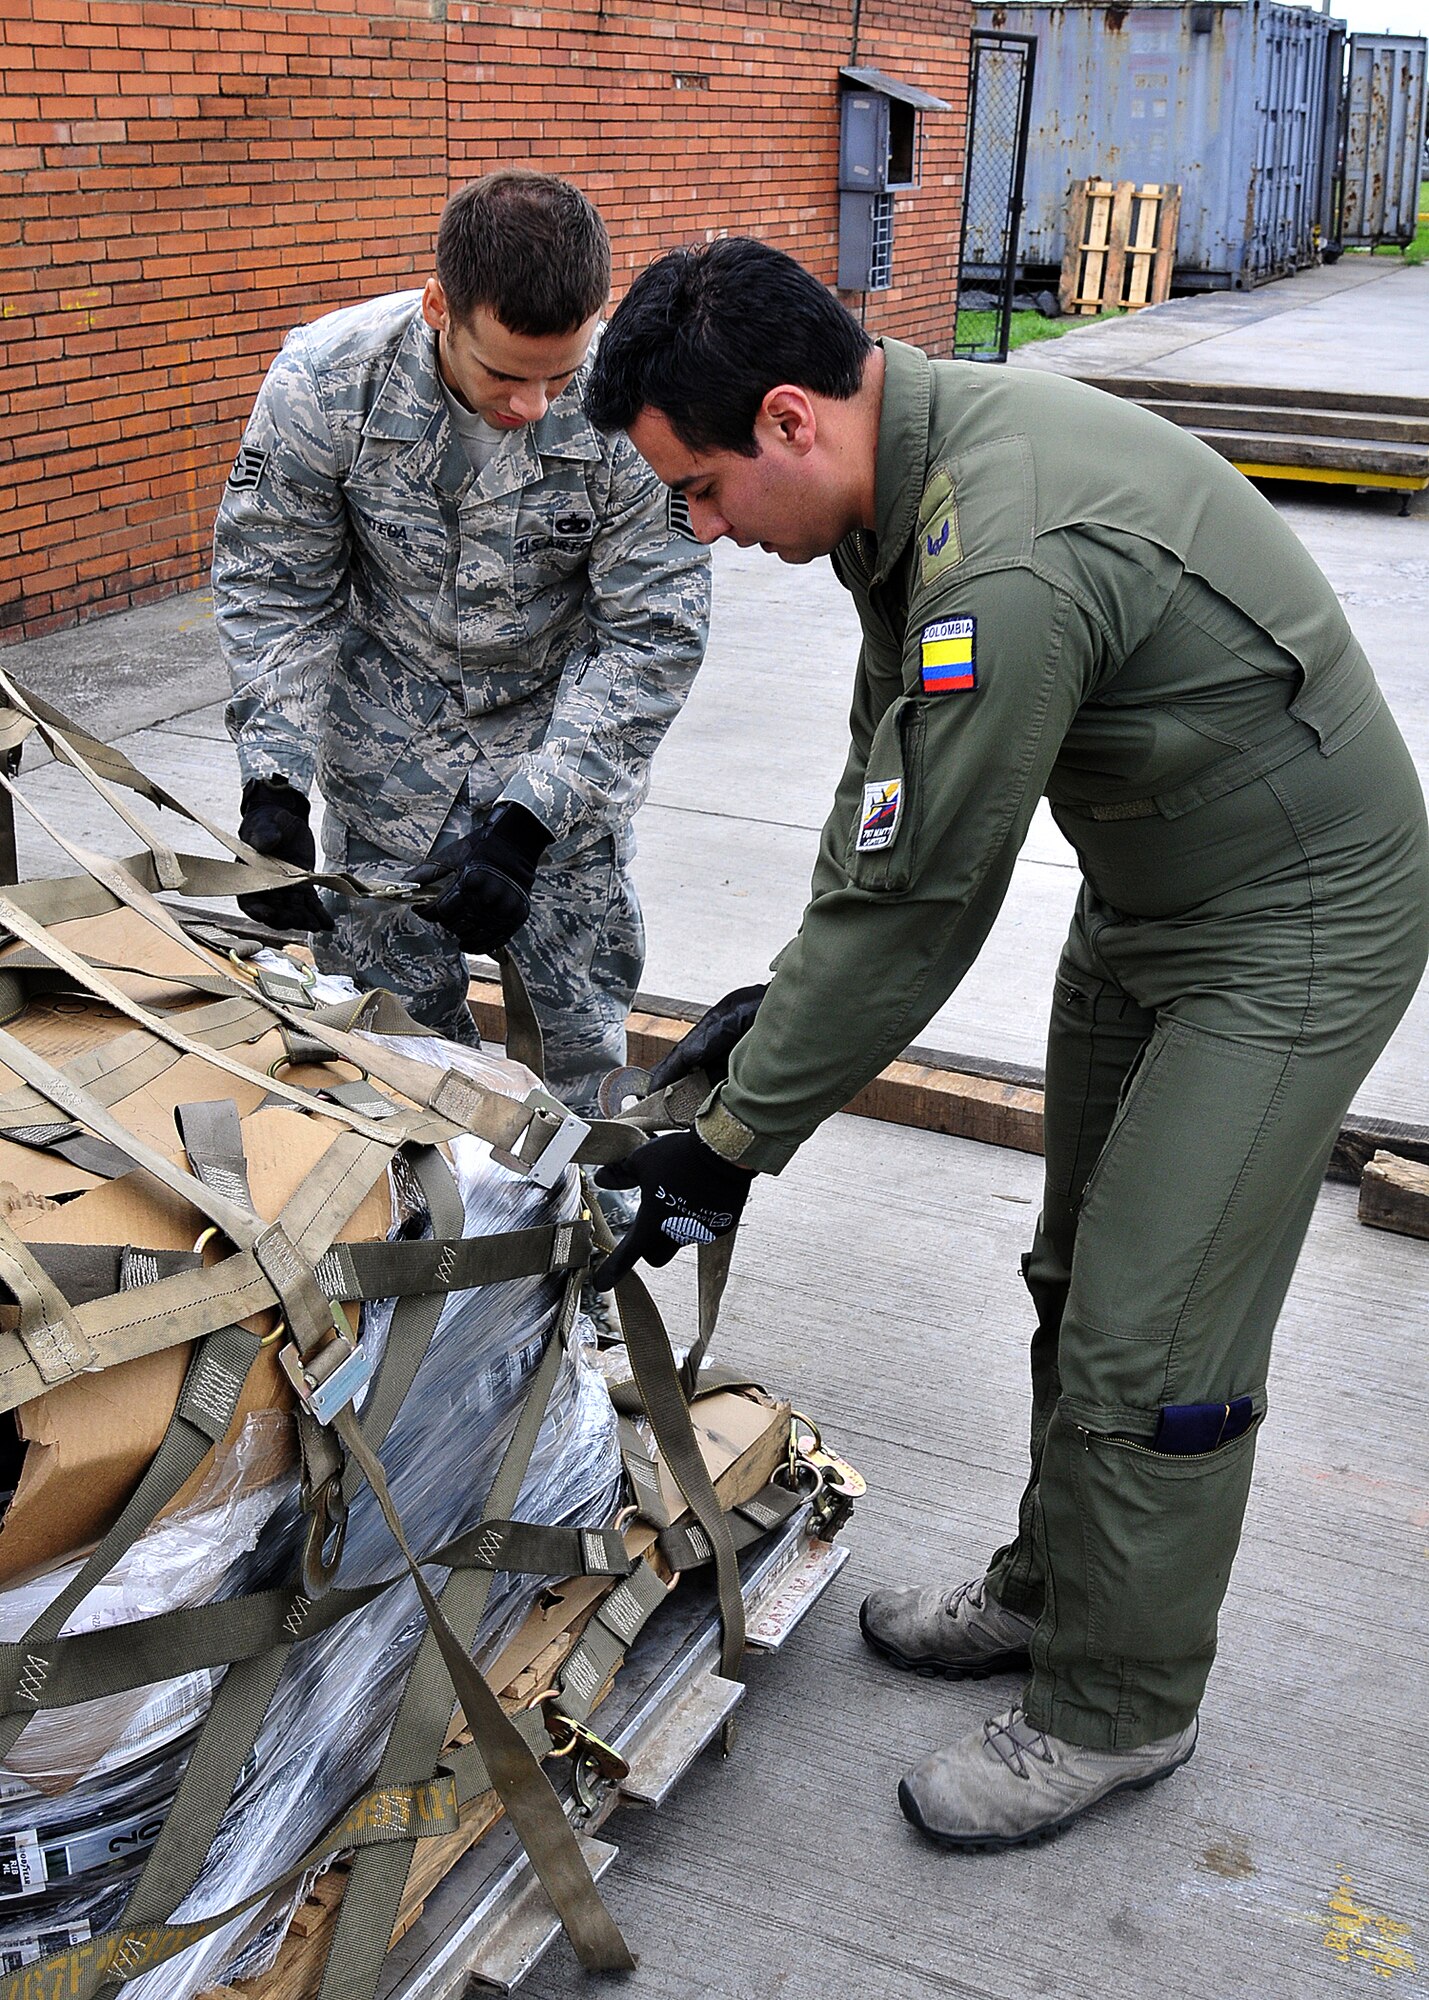 Staff Sgt. Angel Ortega, 571st Mobility Support Advisory Squadron air transportation air advisor, works with Técnico Cuarto Cesar Gomez, Colombian air force, on properly securing cargo during the pallet build-up seminar June 6 at Commando Aéreo de Transporte Militar, Bogota, Colombia.  (U.S. Air Force photo by Tech. Sgt. Lesley Waters)